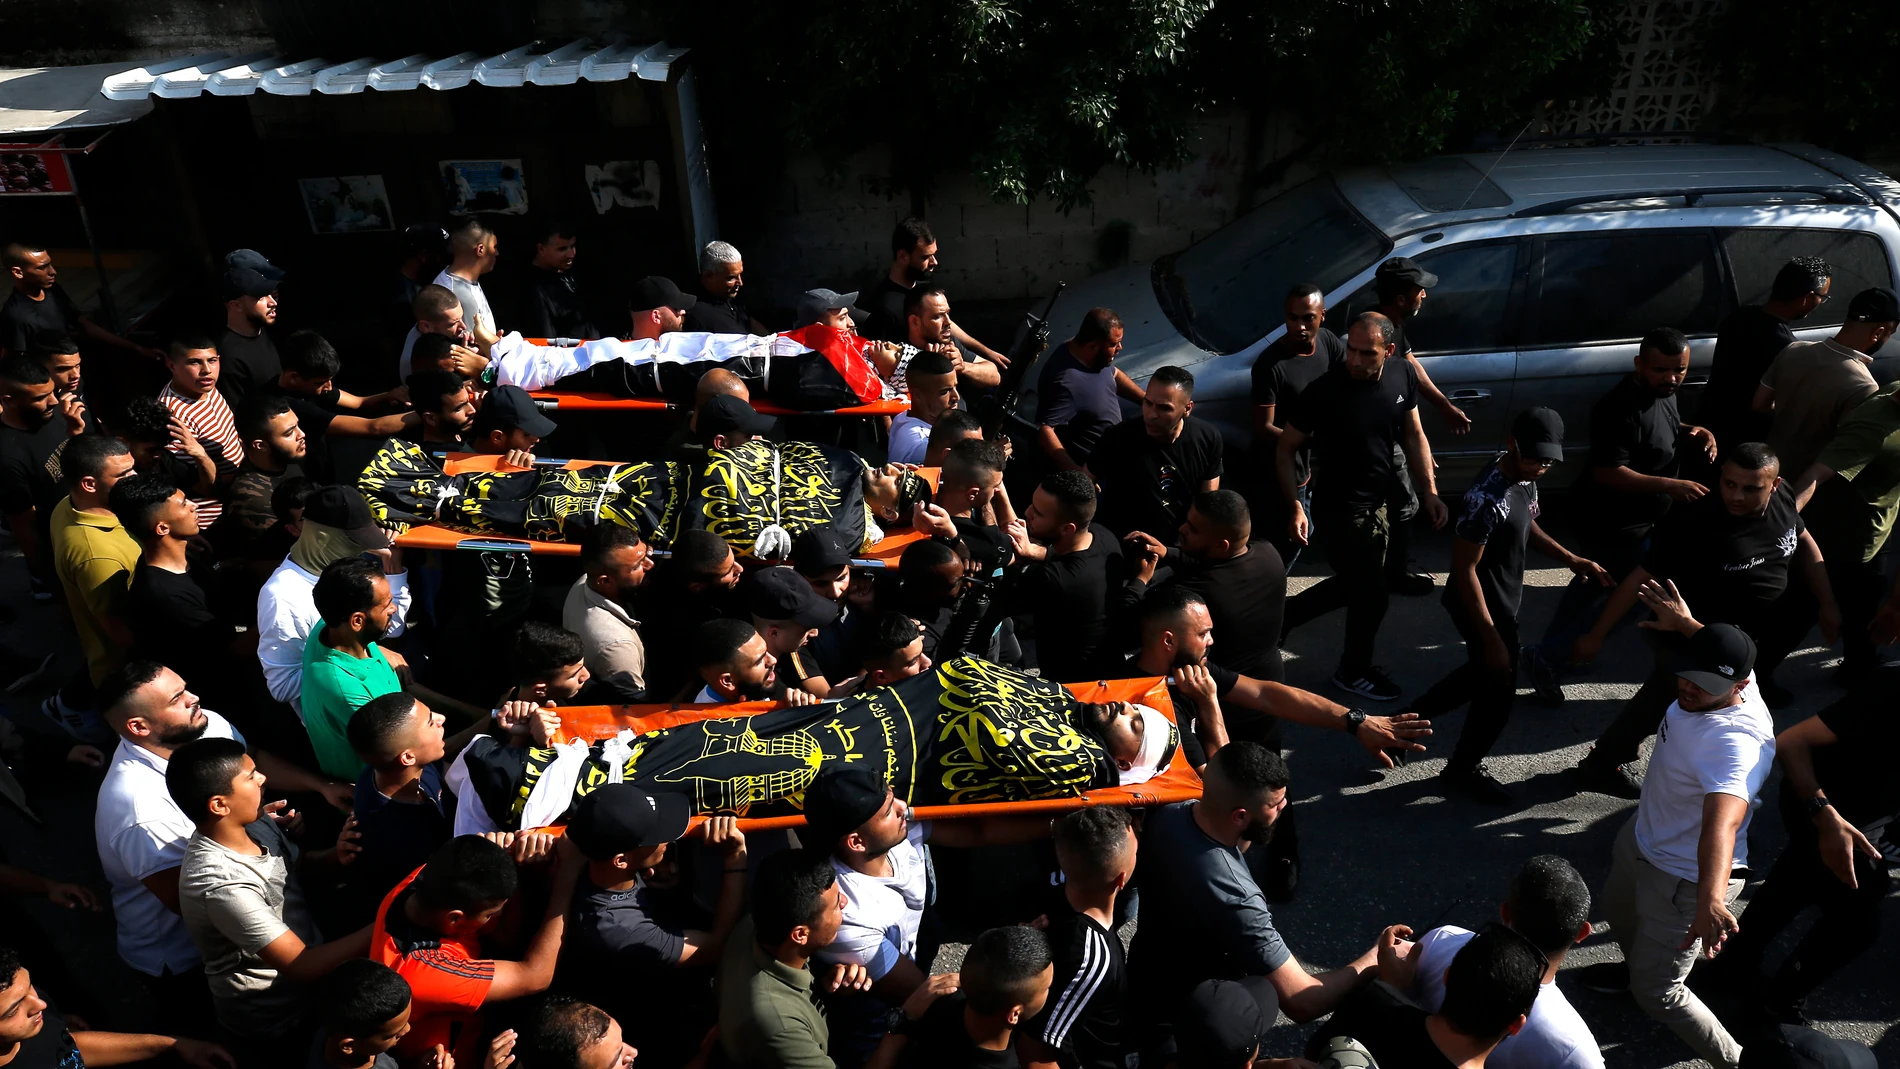 Jenin (-), 19/06/2023.- The bodies of Palestinians killed in an Israeli army raid are carried during the funeral in the West Bank city of Jenin, 19 June 2023. Israeli forces announced in a statement on 19 June, that they conducted a raid to 'apprehend two wanted suspects' in the city of Jenin. In a rare move, they used helicopters to open fire at what they described as armed gunmen. Israeli forces accused Palestinian gunmen of hurling at them 'large numbers of explosive devices', prompting th...